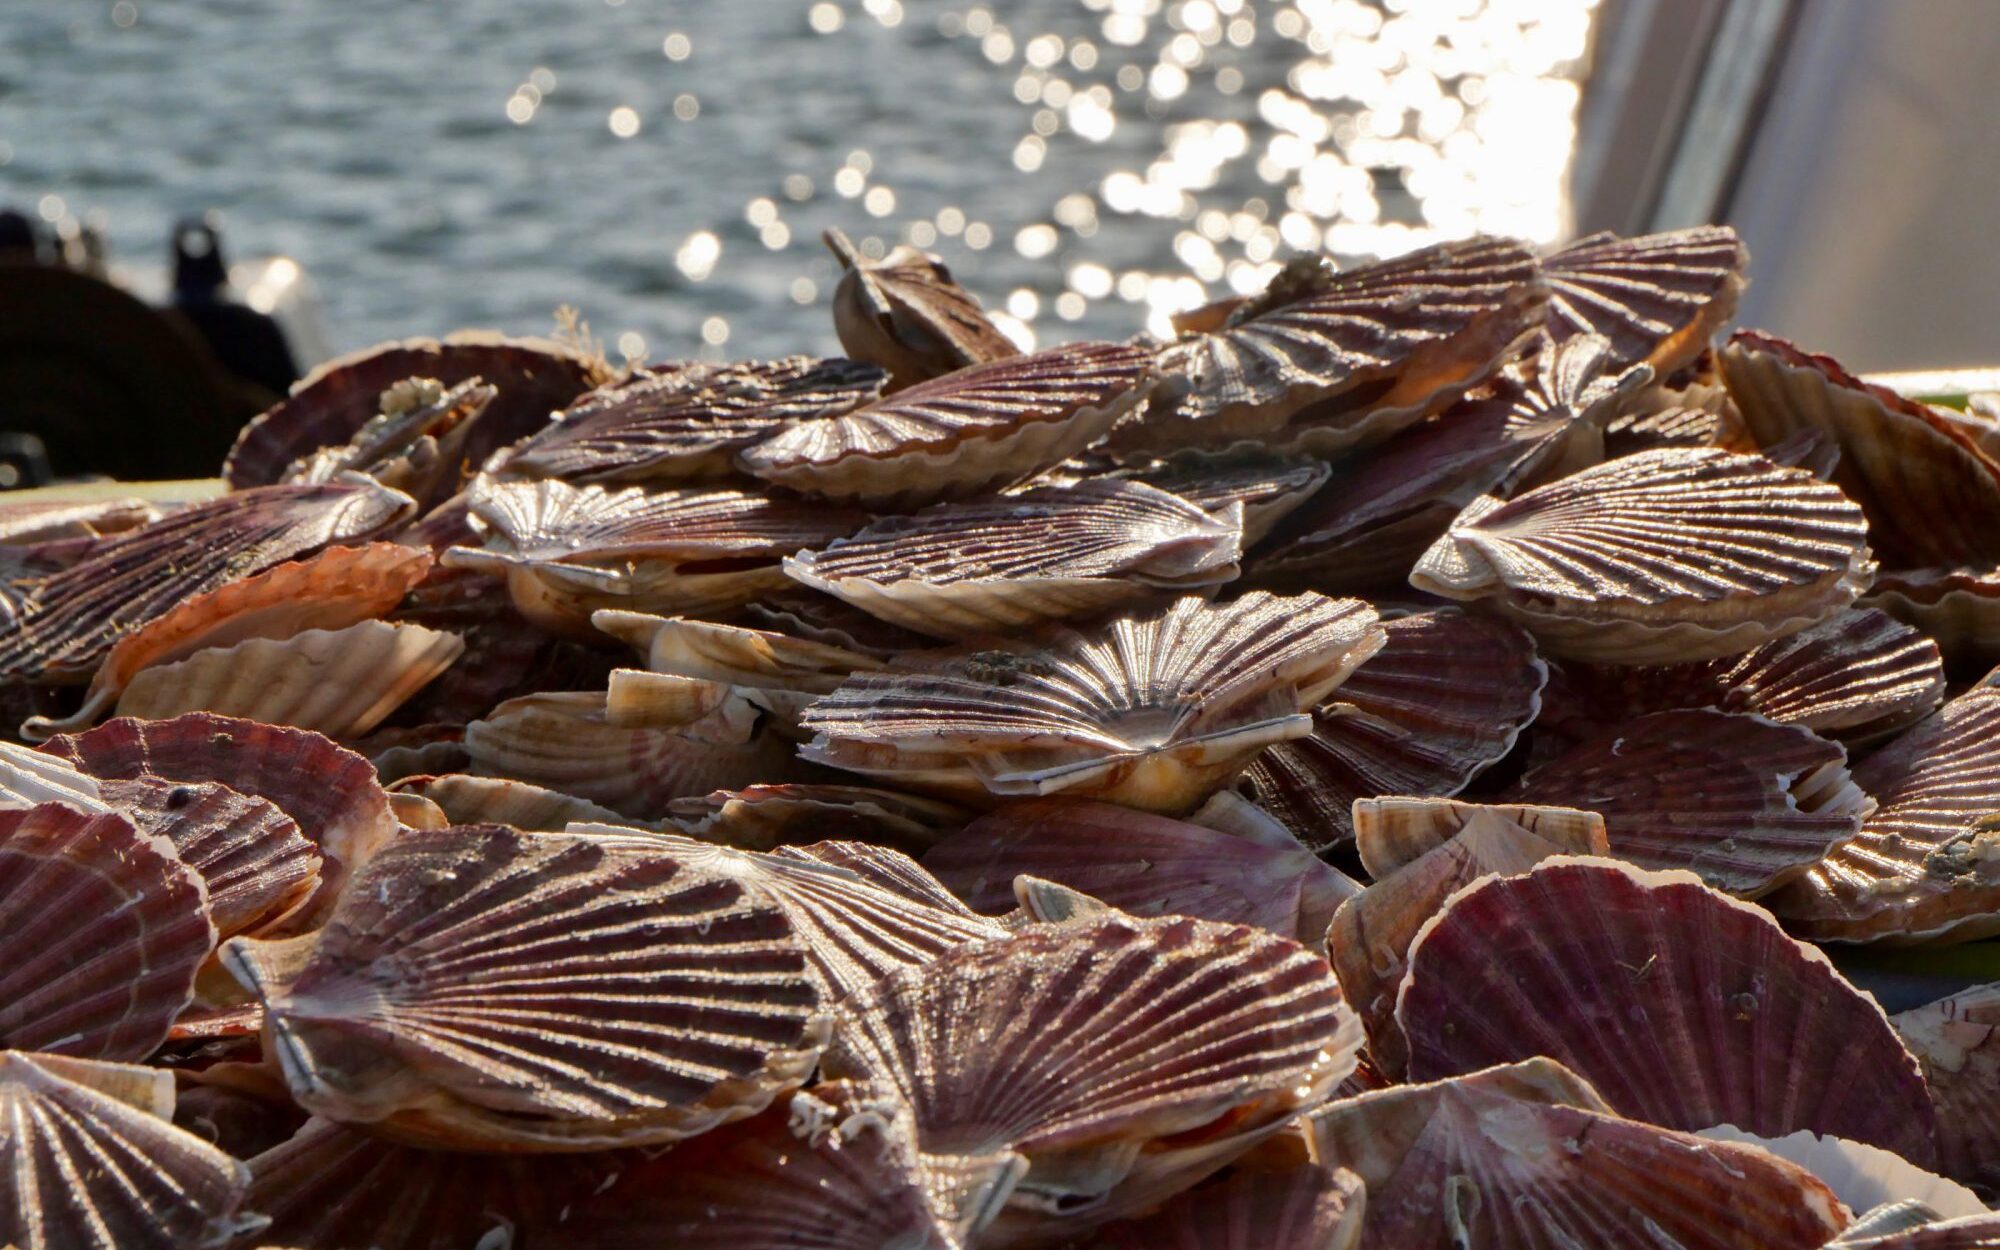 Scallop shells: How the seafood is used other than for eating